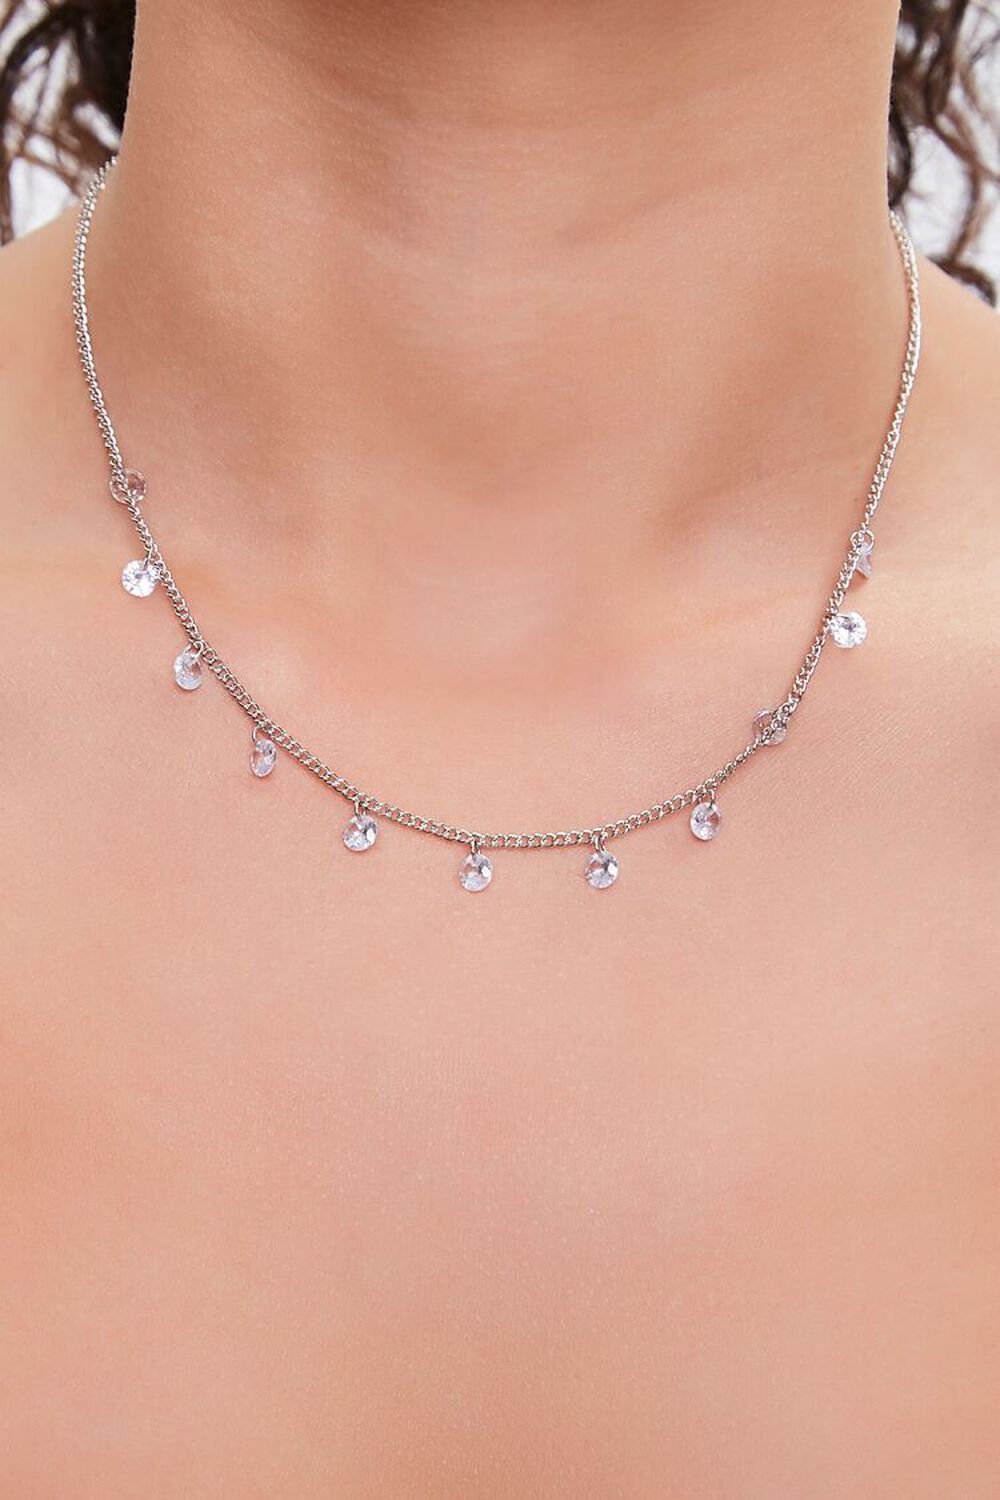 SILVER/CLEAR Faux Gem Chain Necklace, image 1